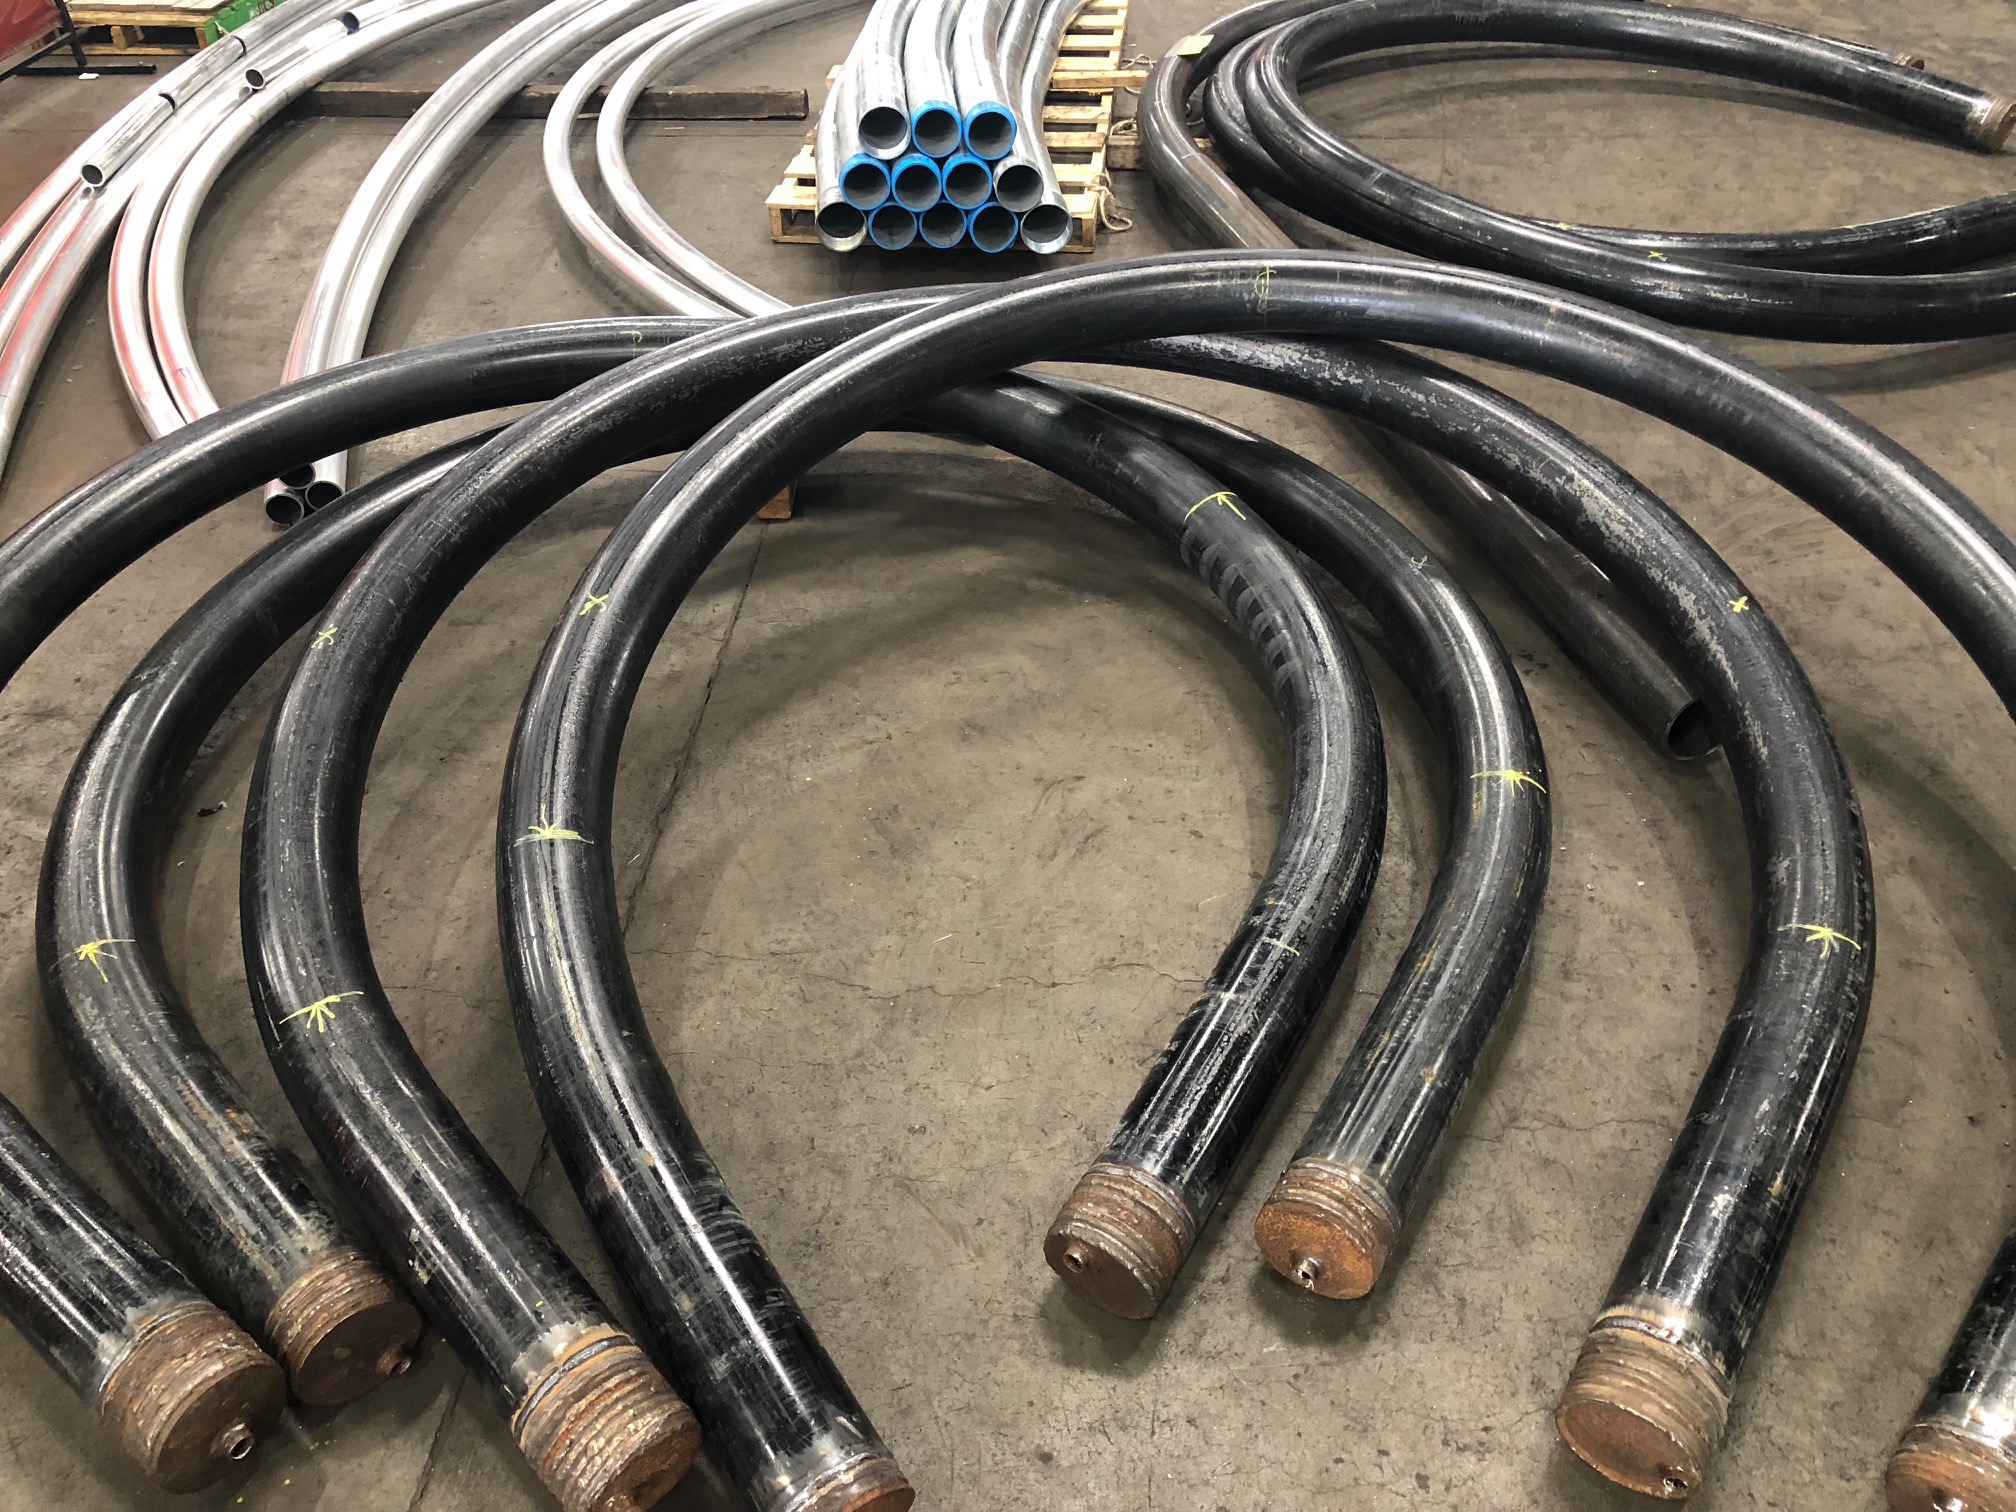 6" pipe bends for Hulu